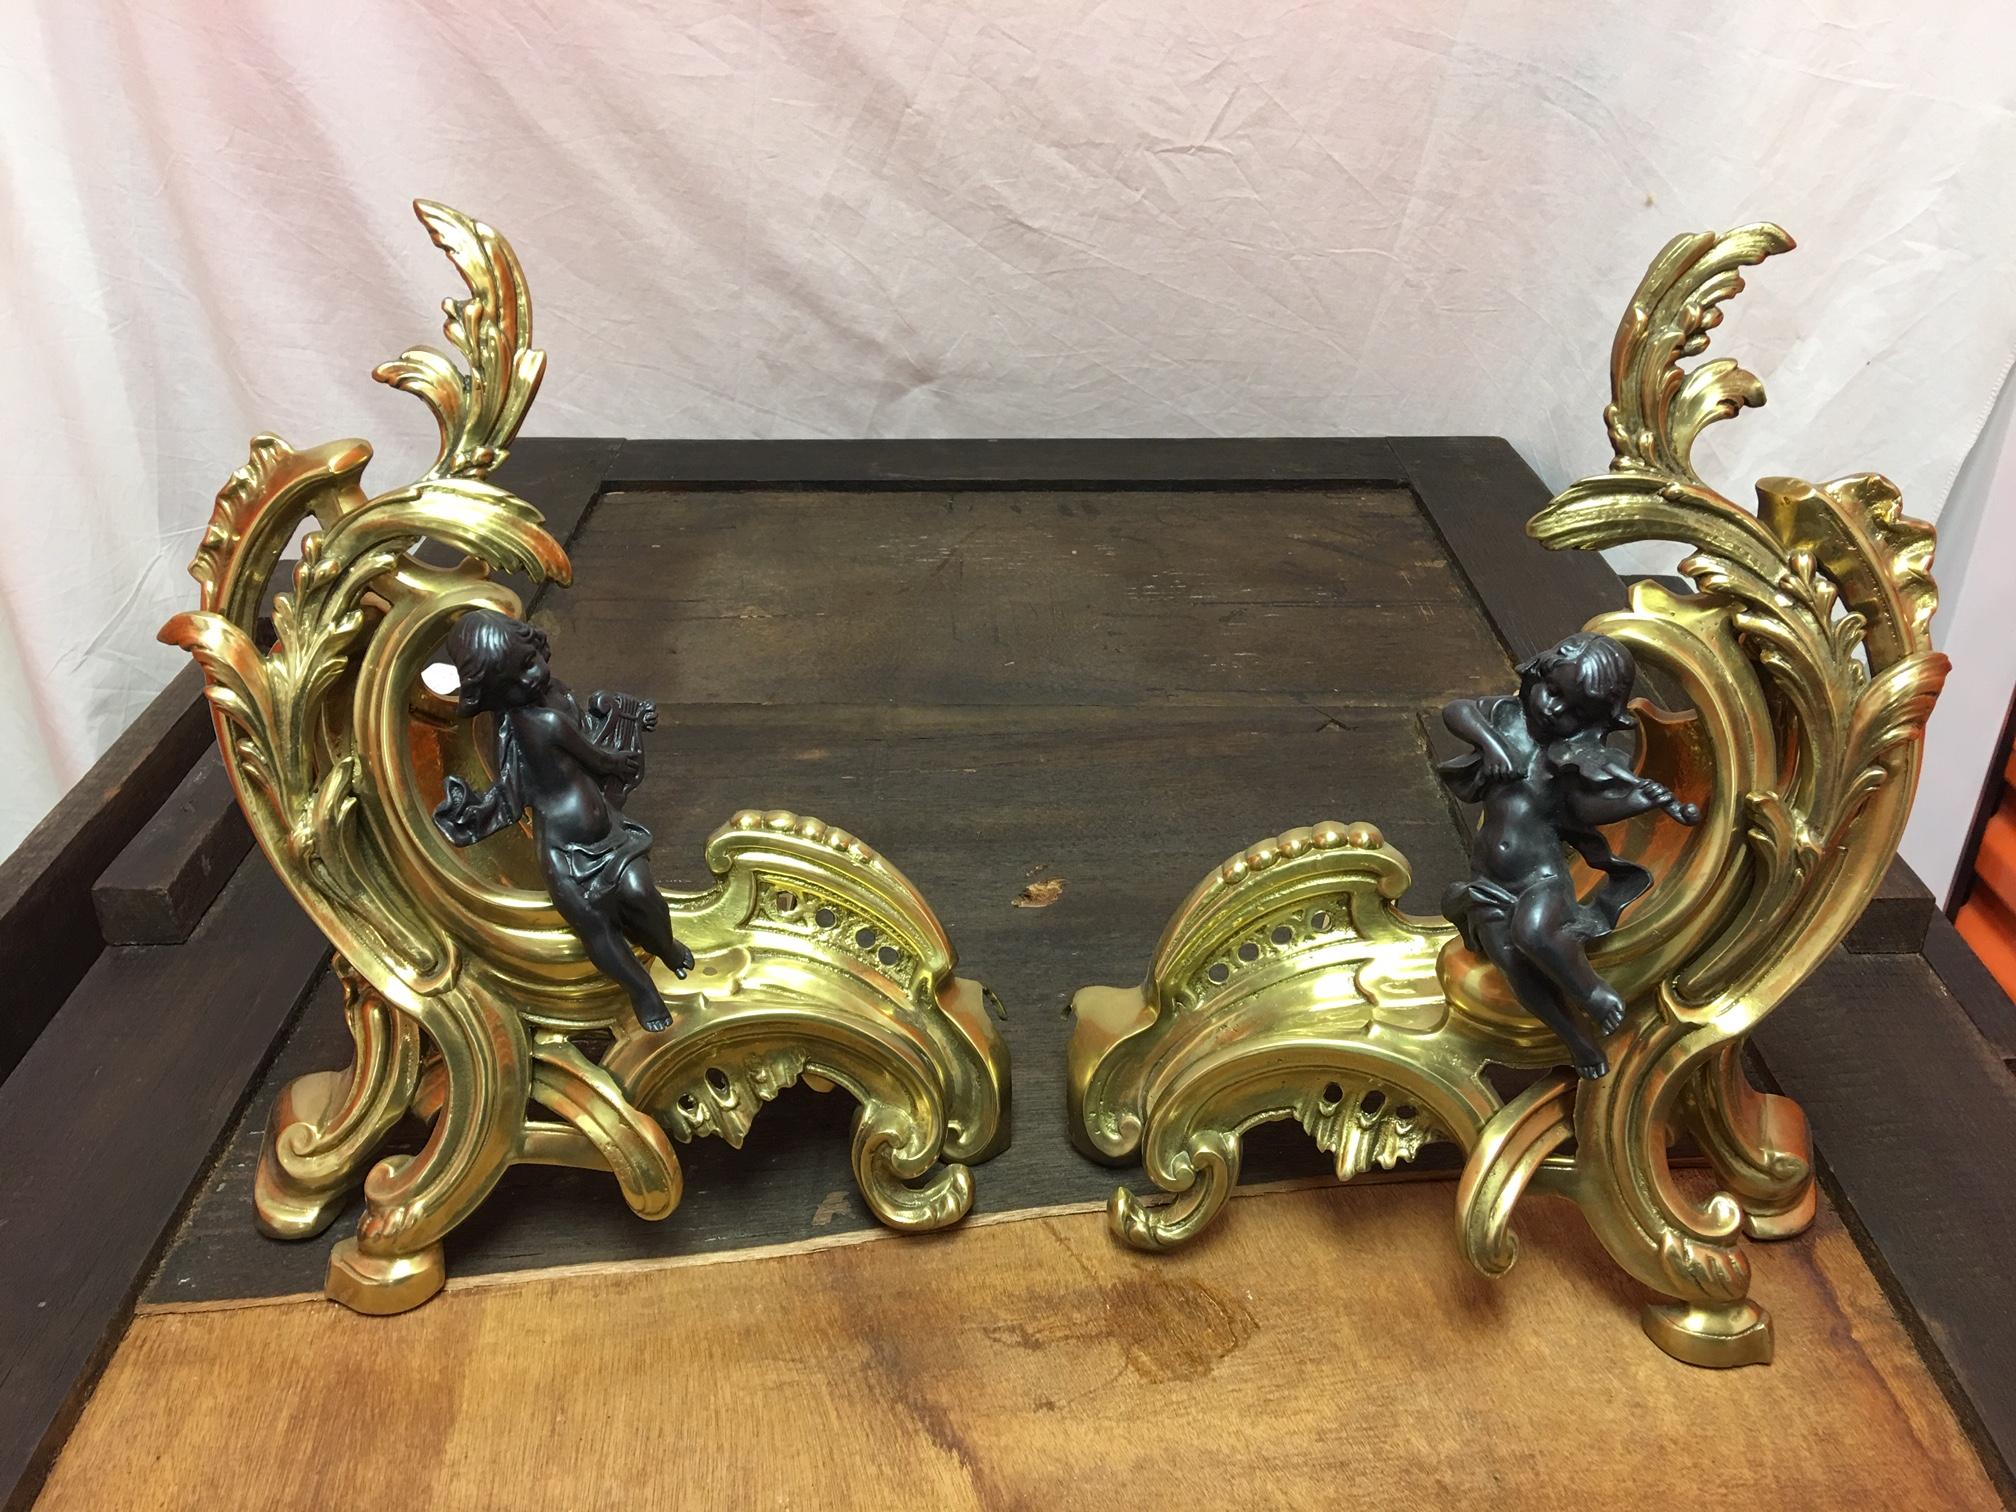 Pair of figural bronze Chenets with a fender, early 20th century.